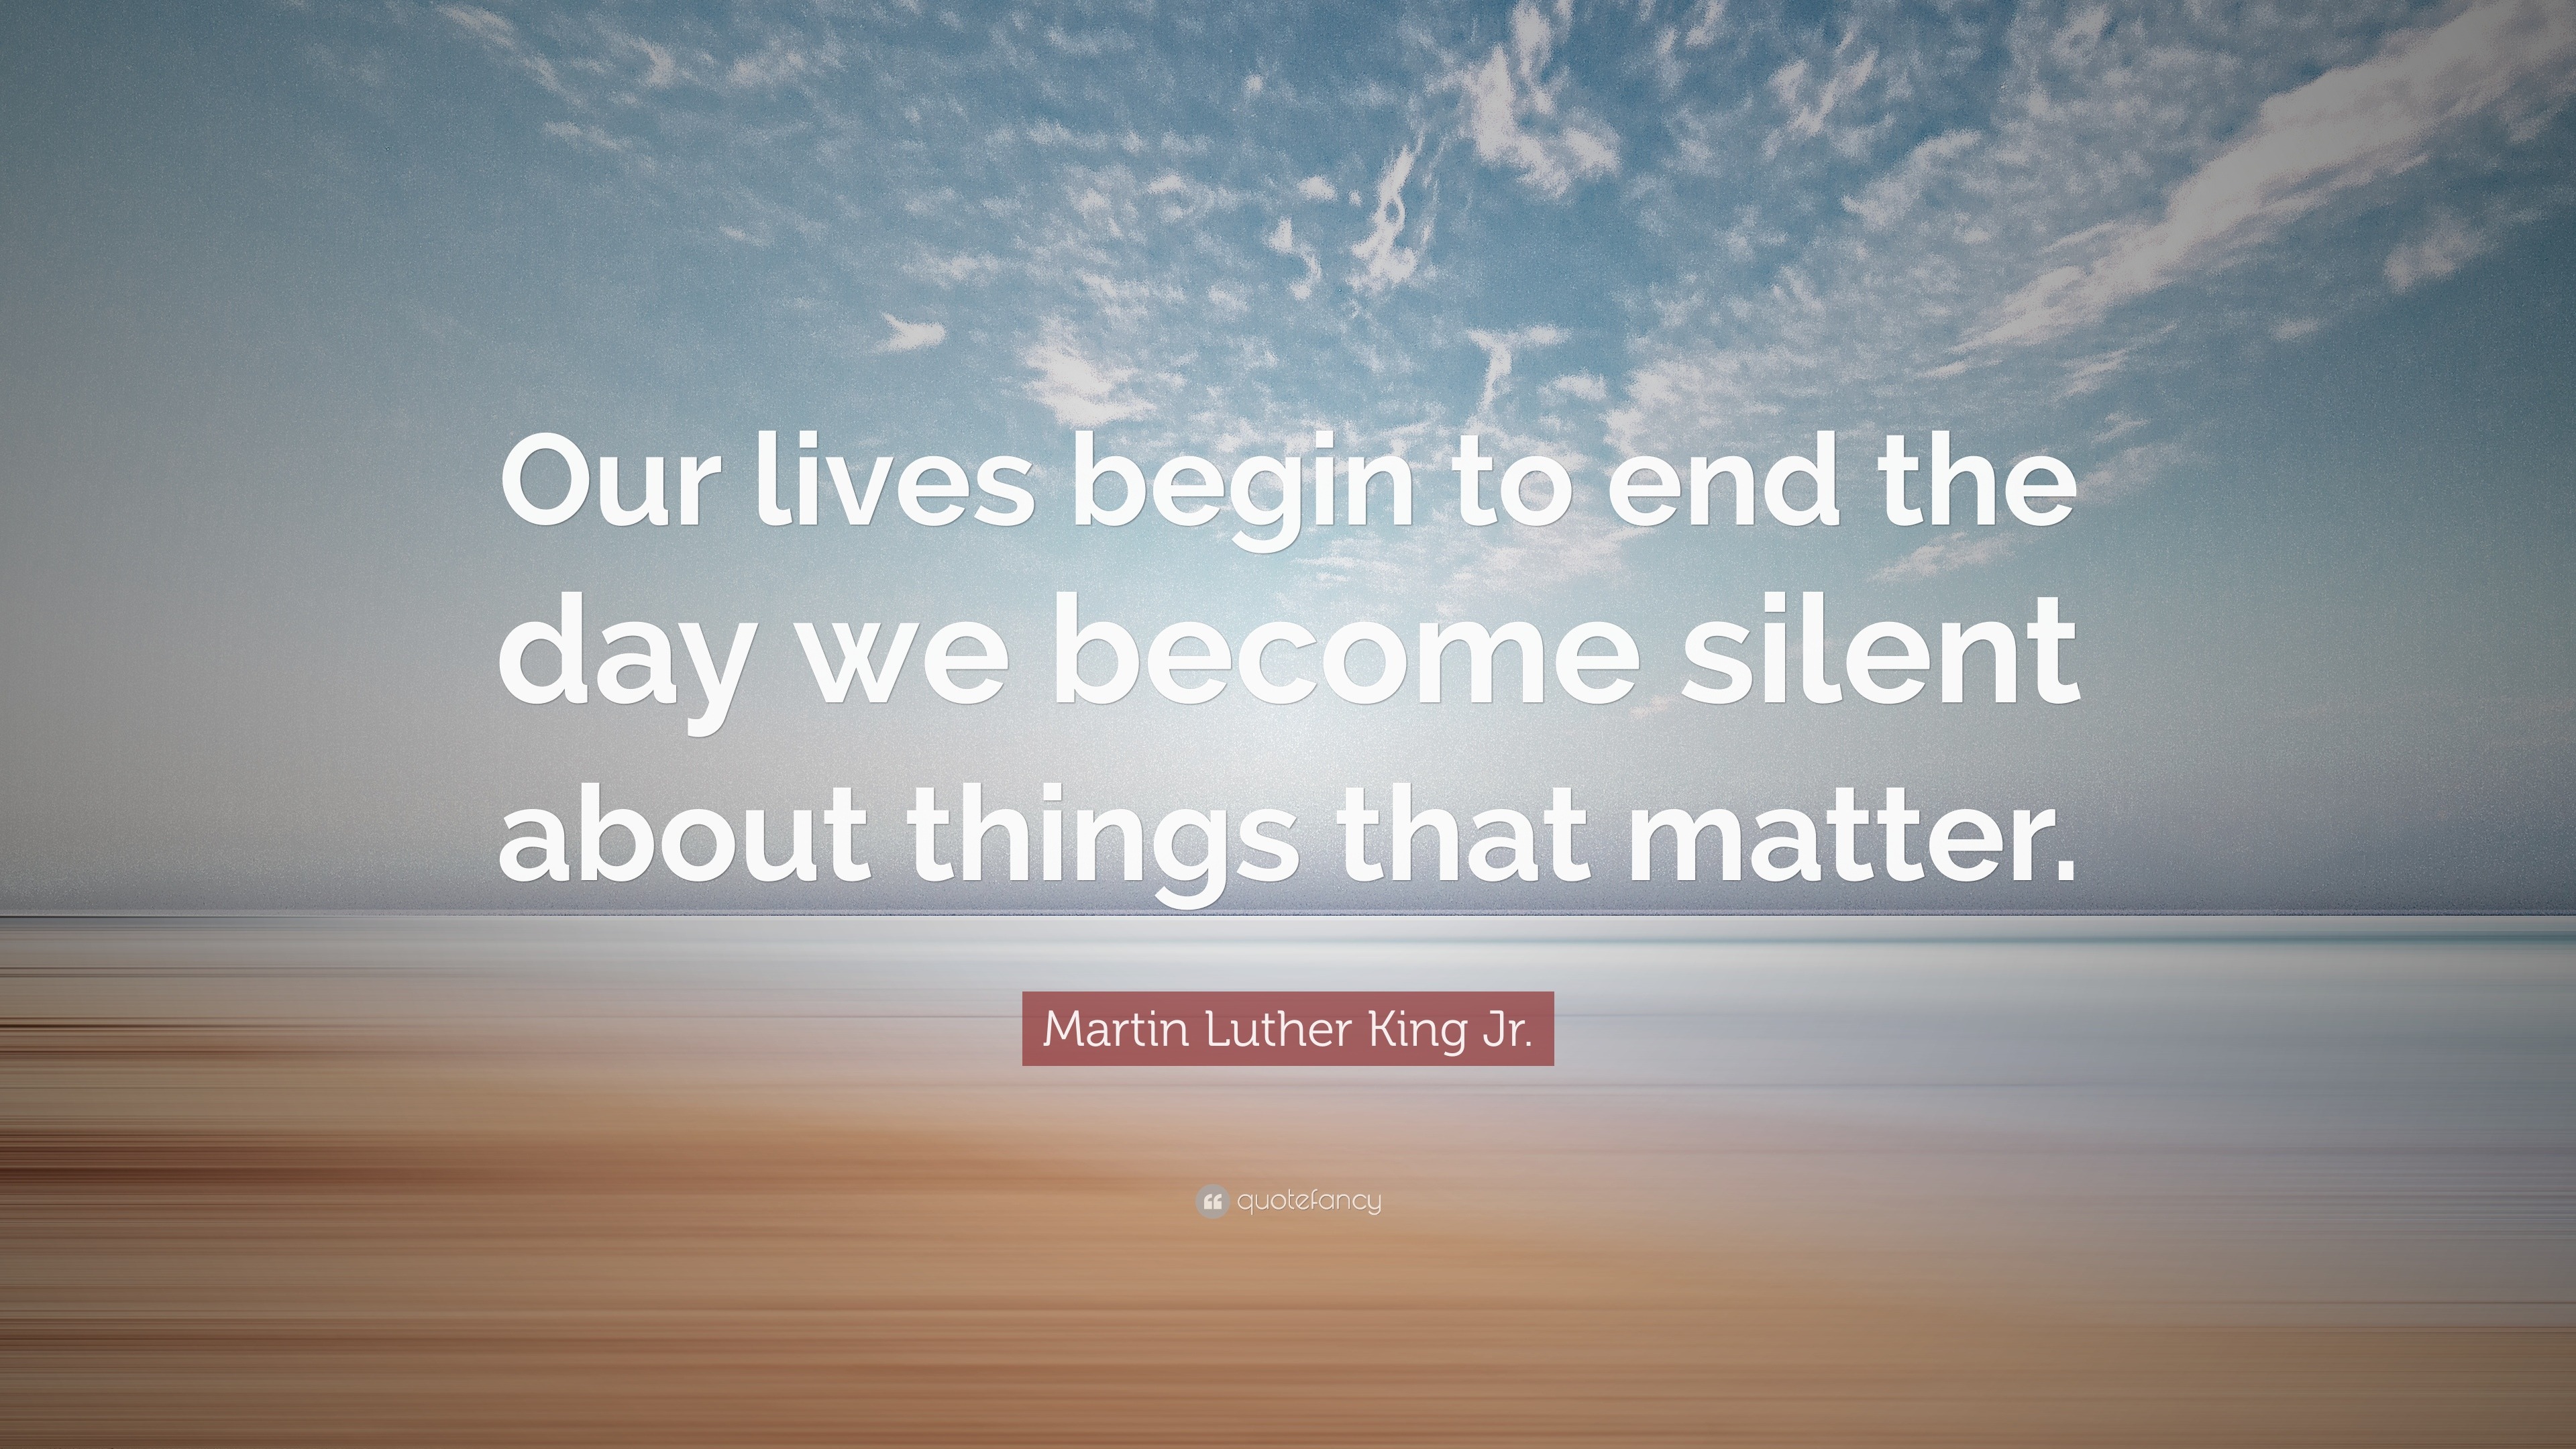 Martin Luther King Jr. Quote “Our lives begin to end the